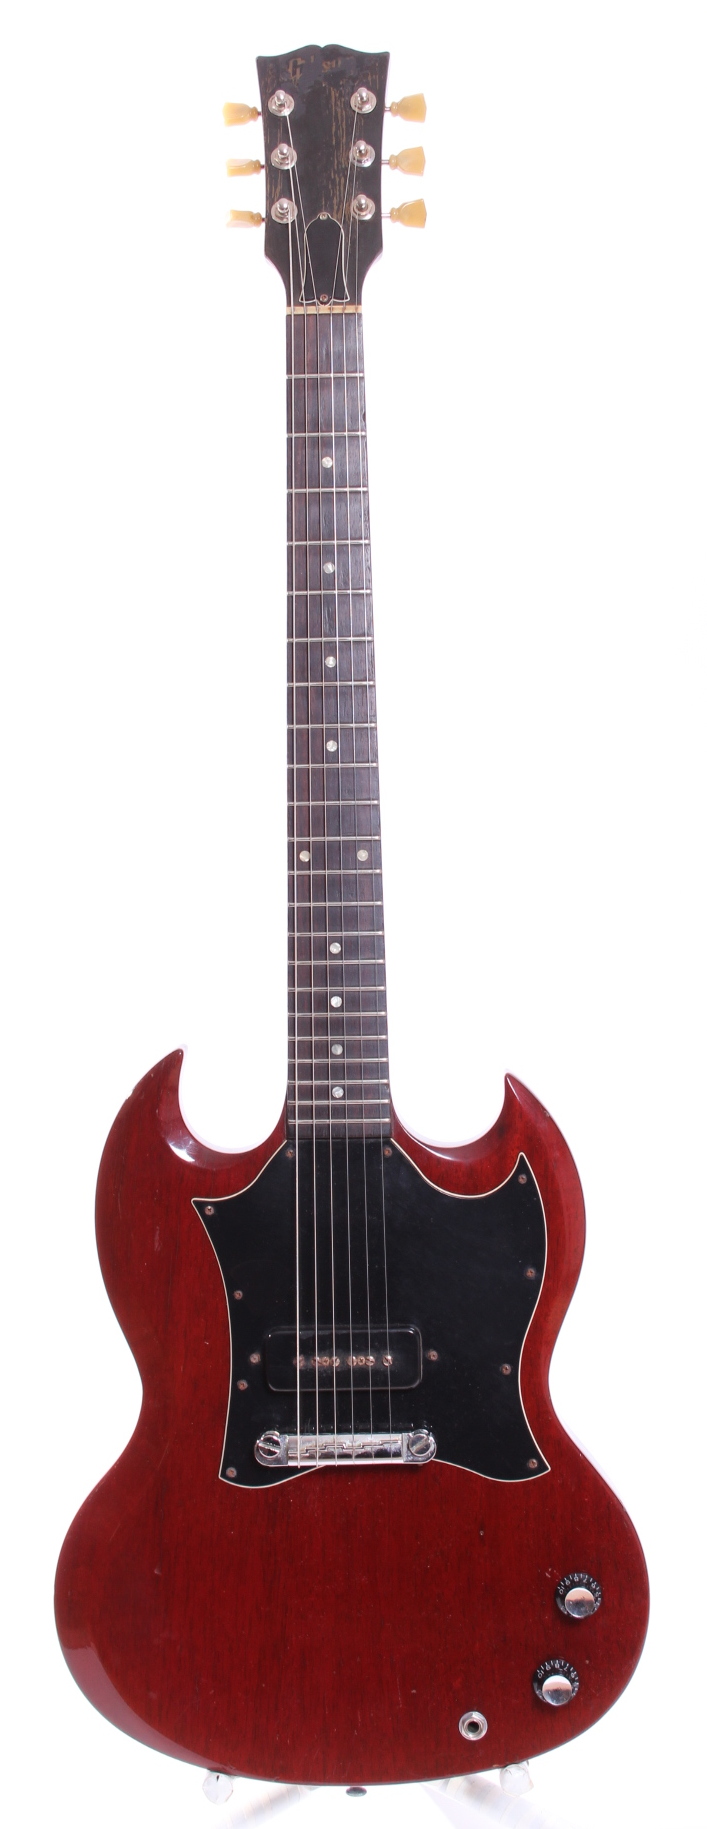 Gibson SG Junior 2004 Cherry Red Guitar For Sale Yeahman's ...